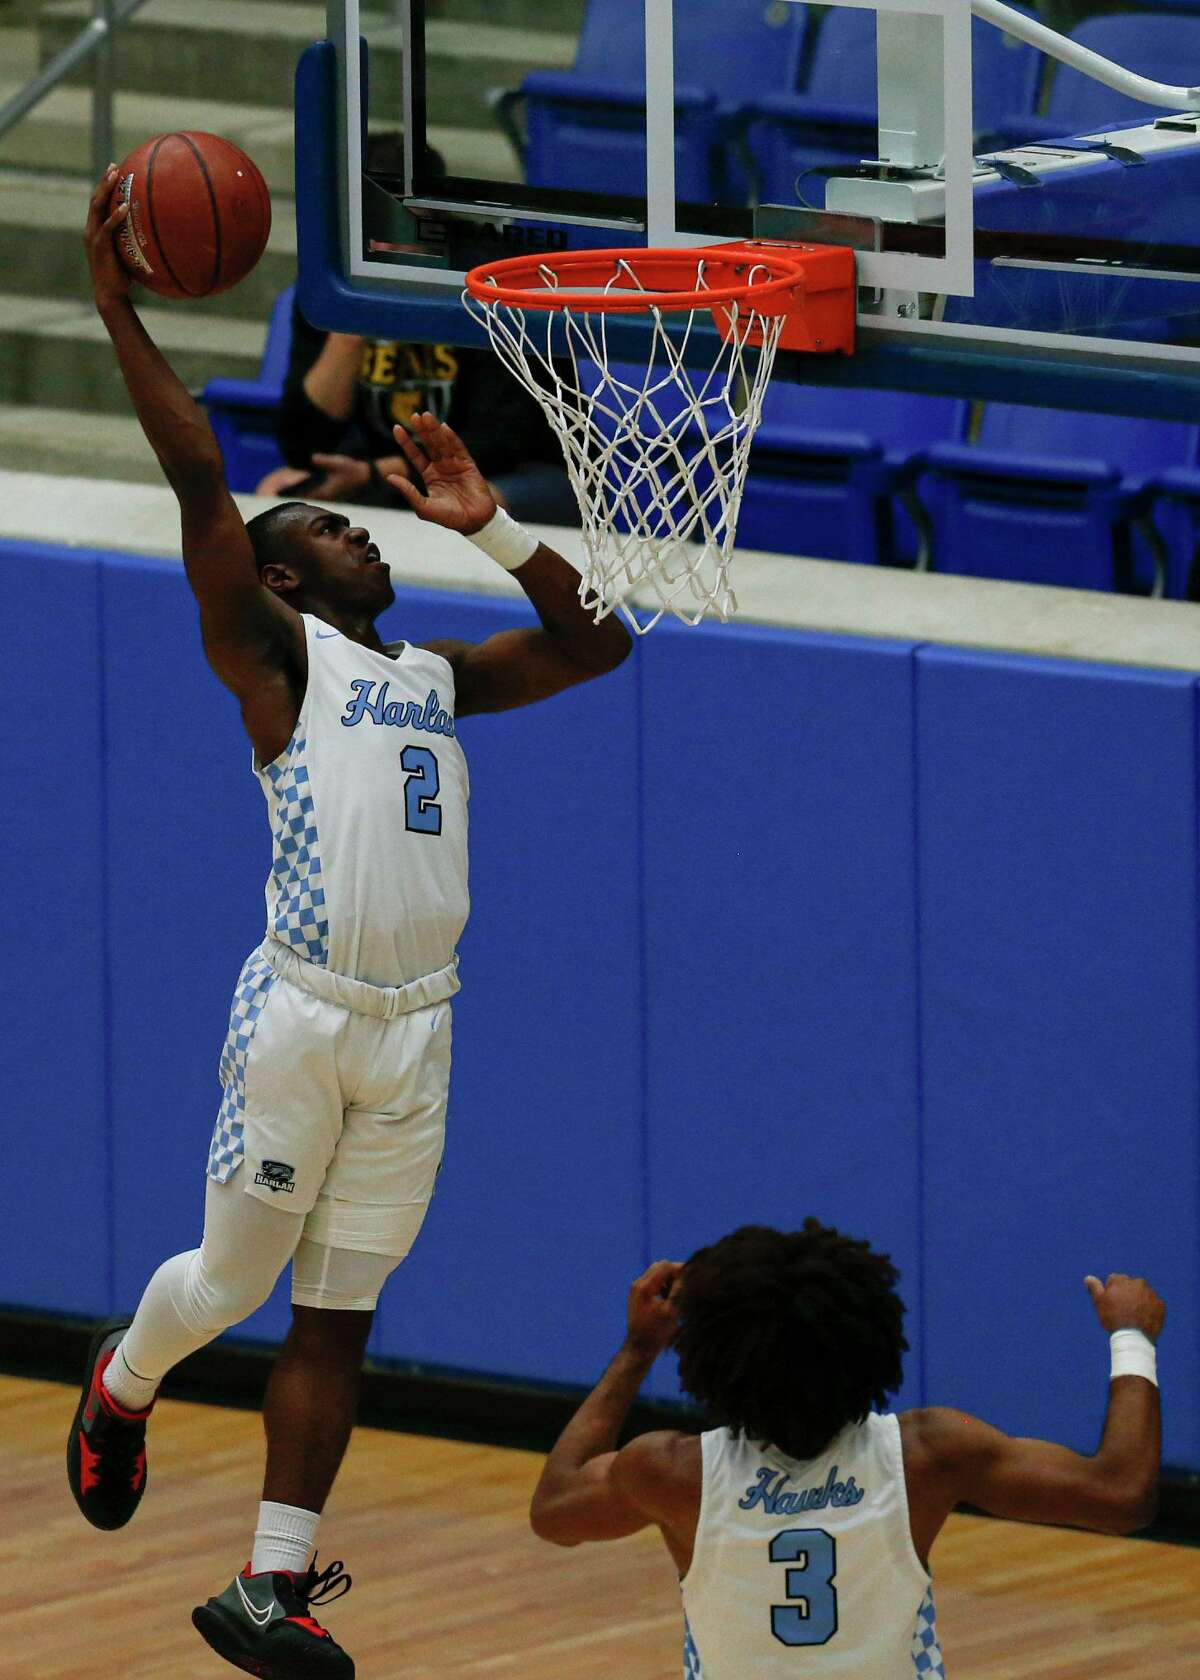 Harlan's Kalon Hargrove (2) attempts to dunk the ball during the second quarter against the Brennan Bears take on the Harlan Hawks at Northside Gym in San Antonio, Texas, Tuesday, Dec. 7, 2021. The ball bounced off the rim and the Bears won the rebound.